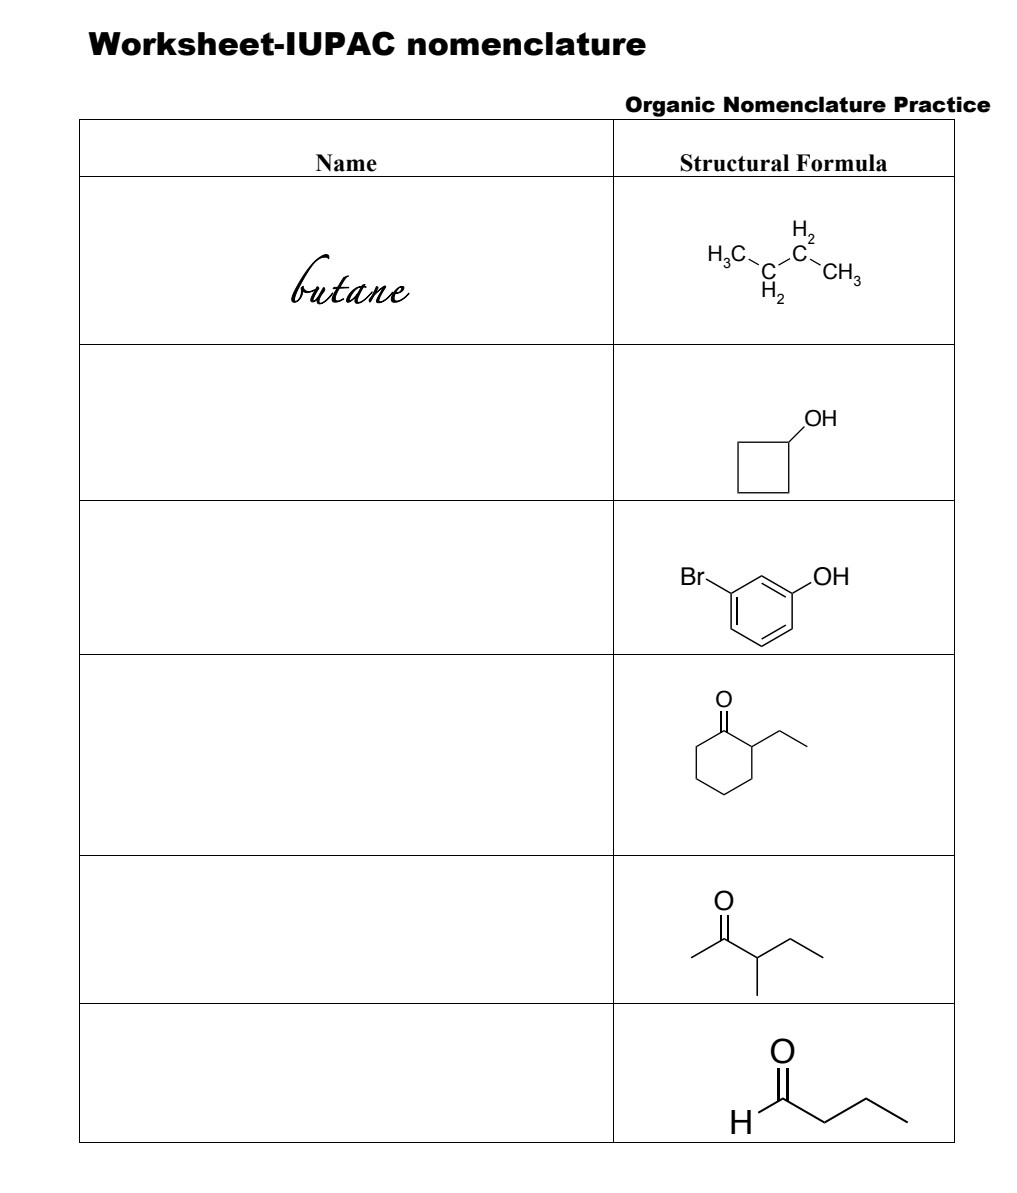 41-organic-chemistry-nomenclature-worksheet-with-answers-worksheet-works